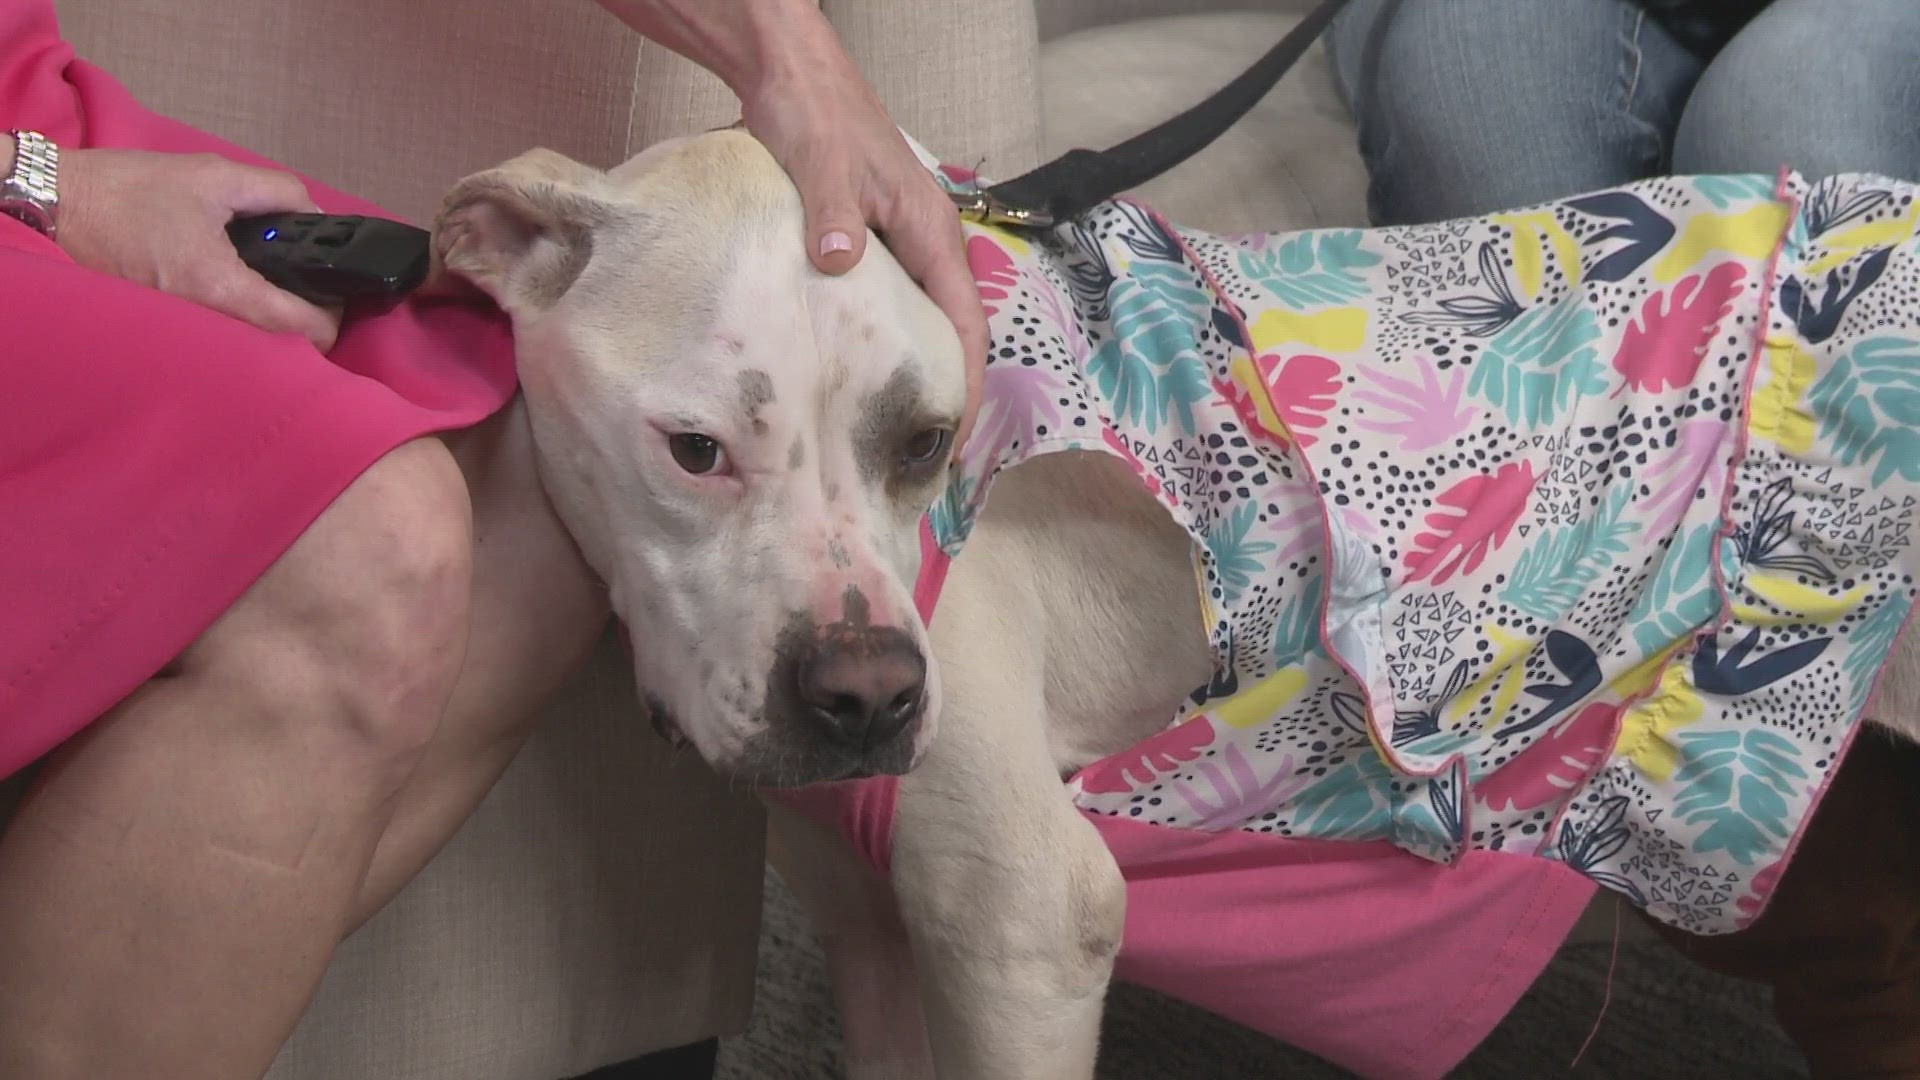 Every week, KVUE shines a spotlight on local animals in need of forever homes.